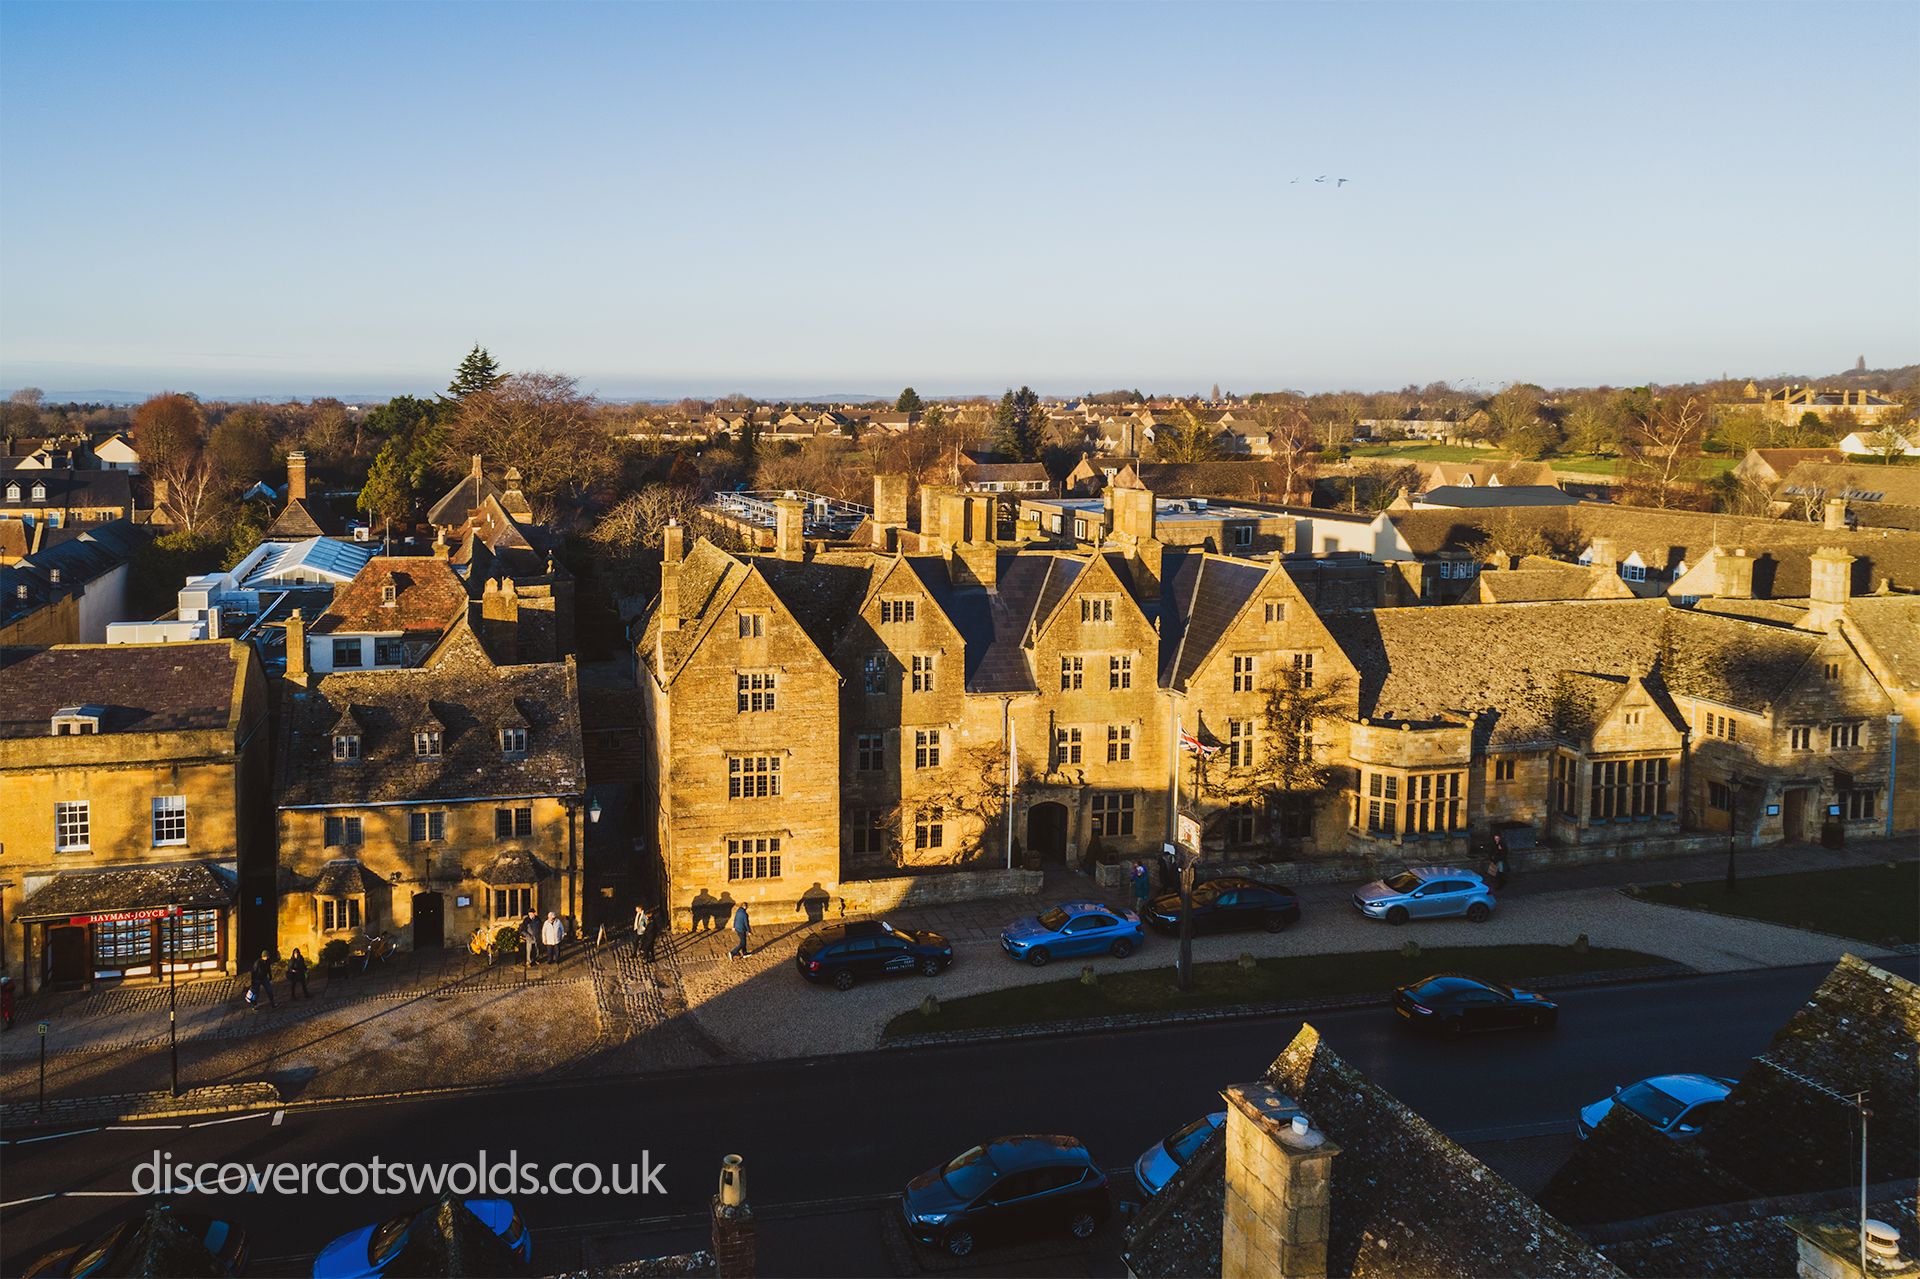 Lygon Arms Hotel in Broadway, Cotswolds